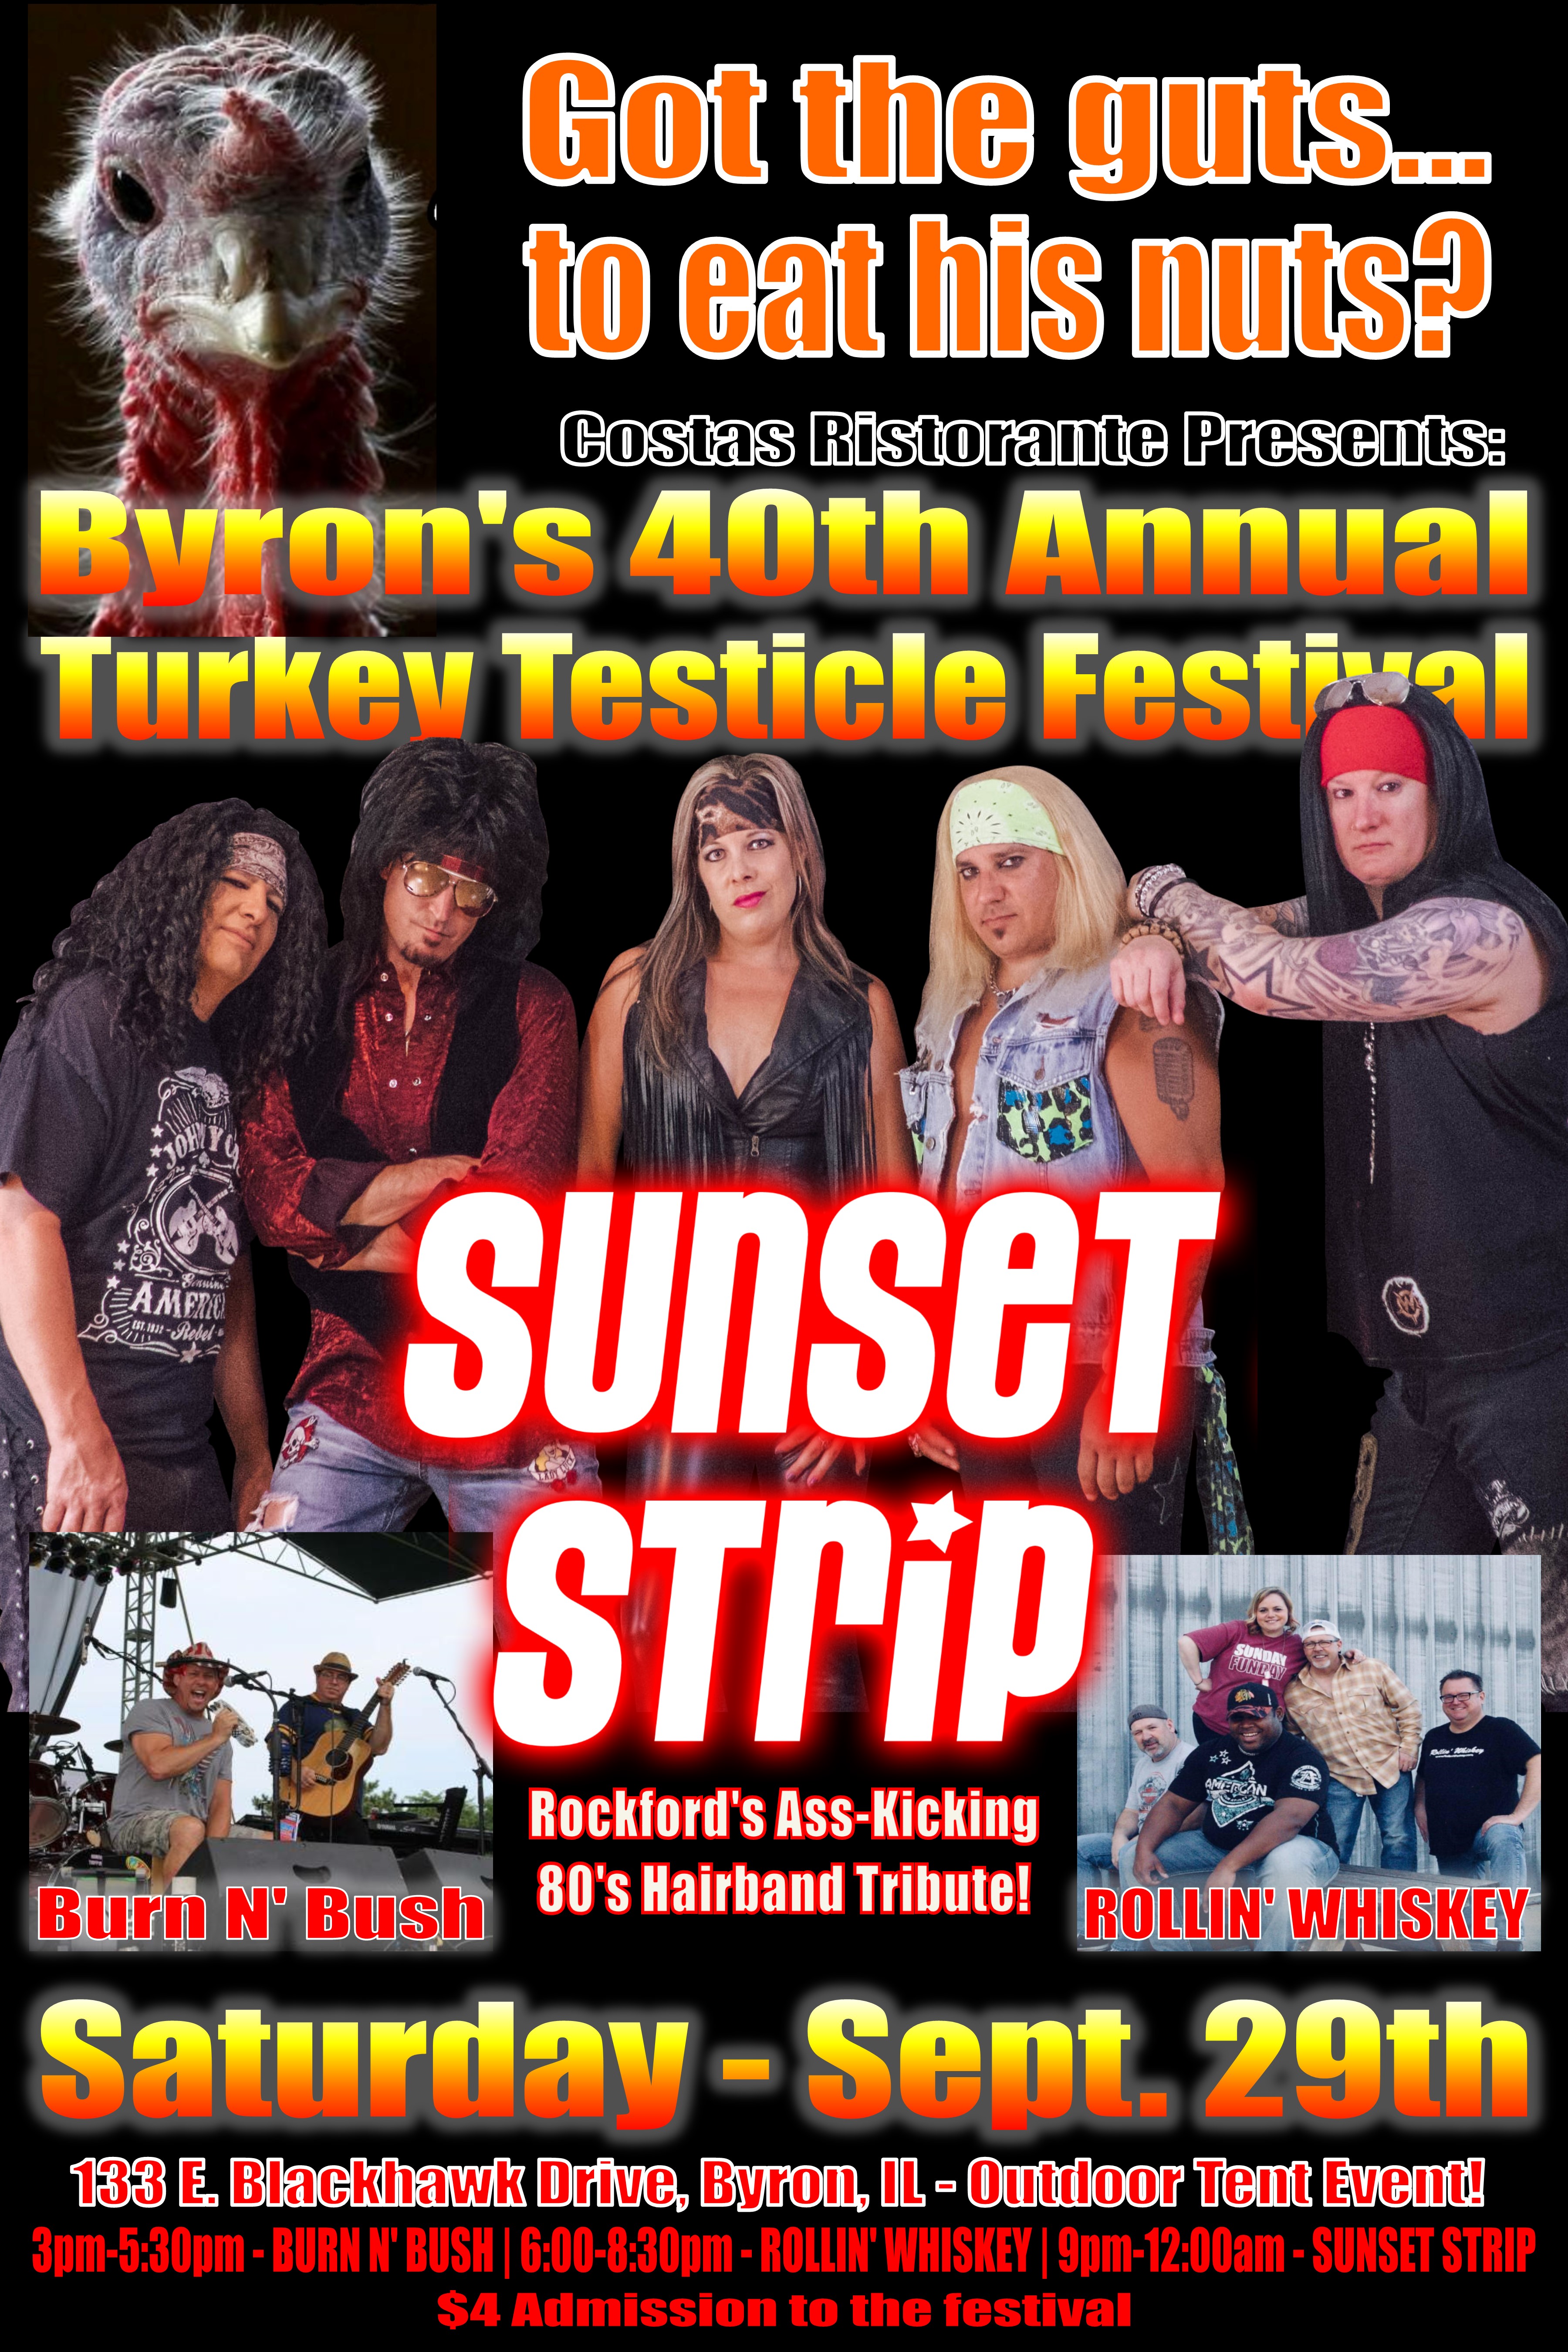 Byron Turkey Testicle Festival @ Costas Ristorante (Outdoors in the Tent) -  Sep 29 2018, 9:00PM